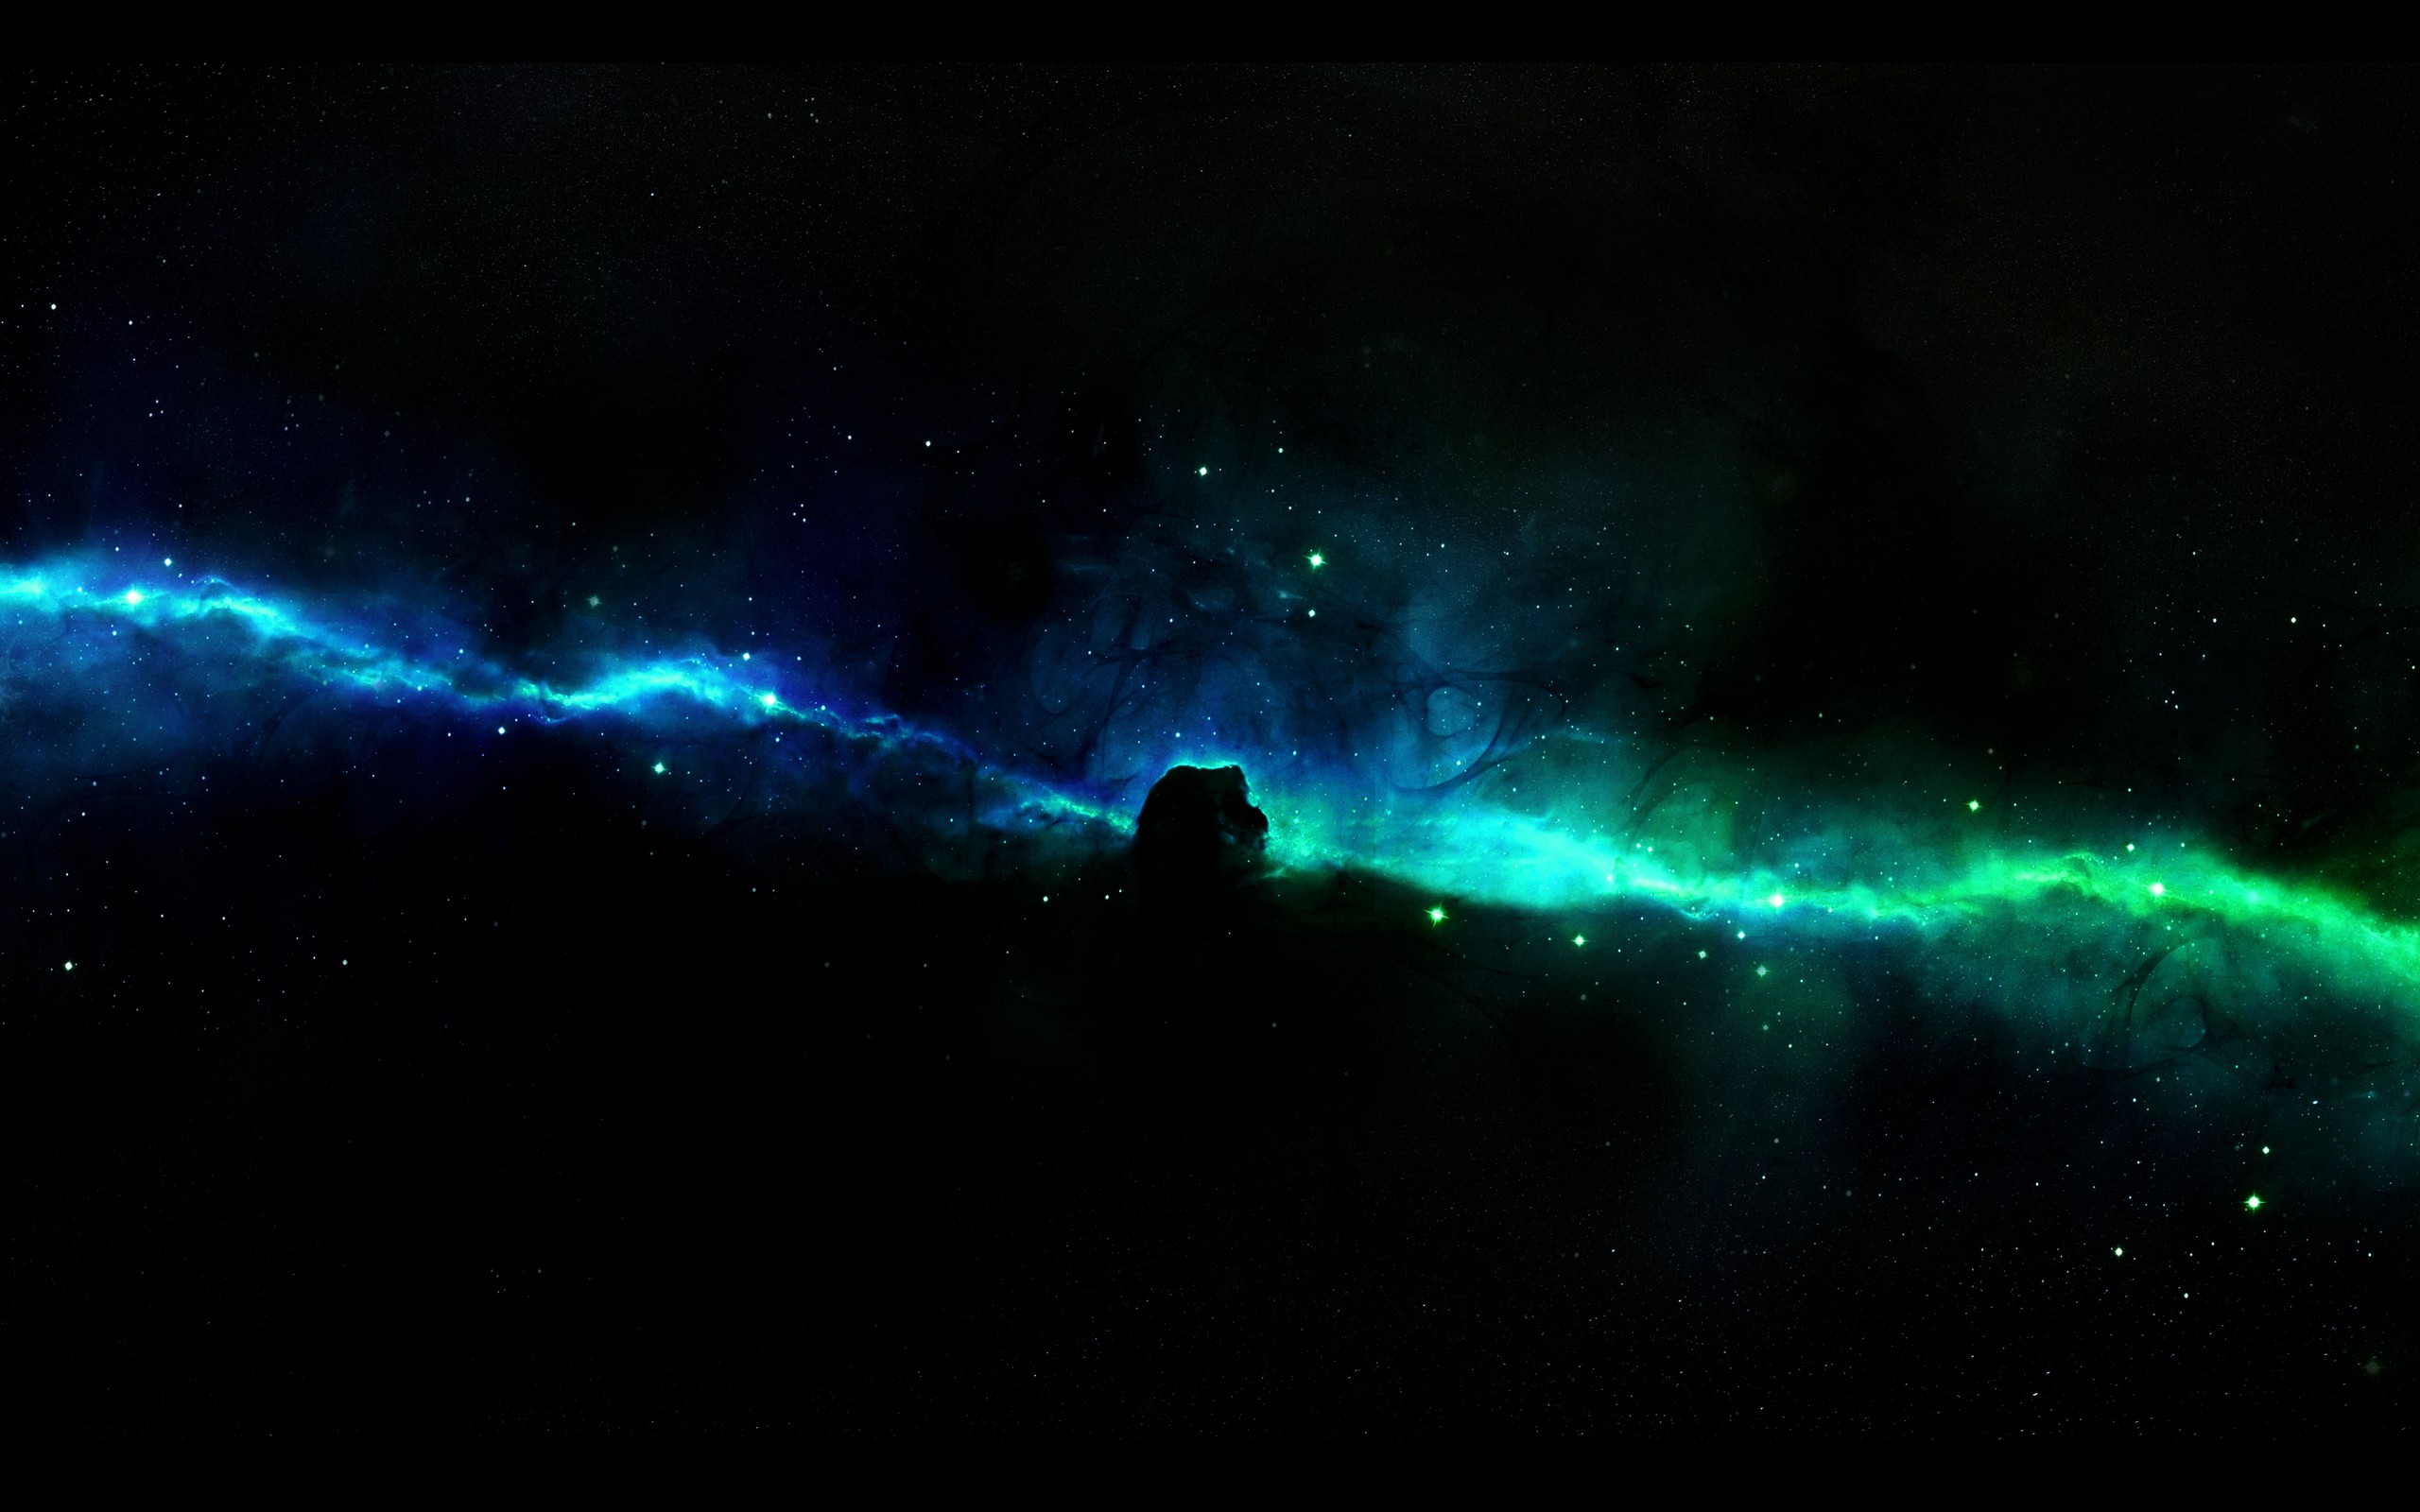 space wallpaper hd,nature,black,atmosphere,darkness,light